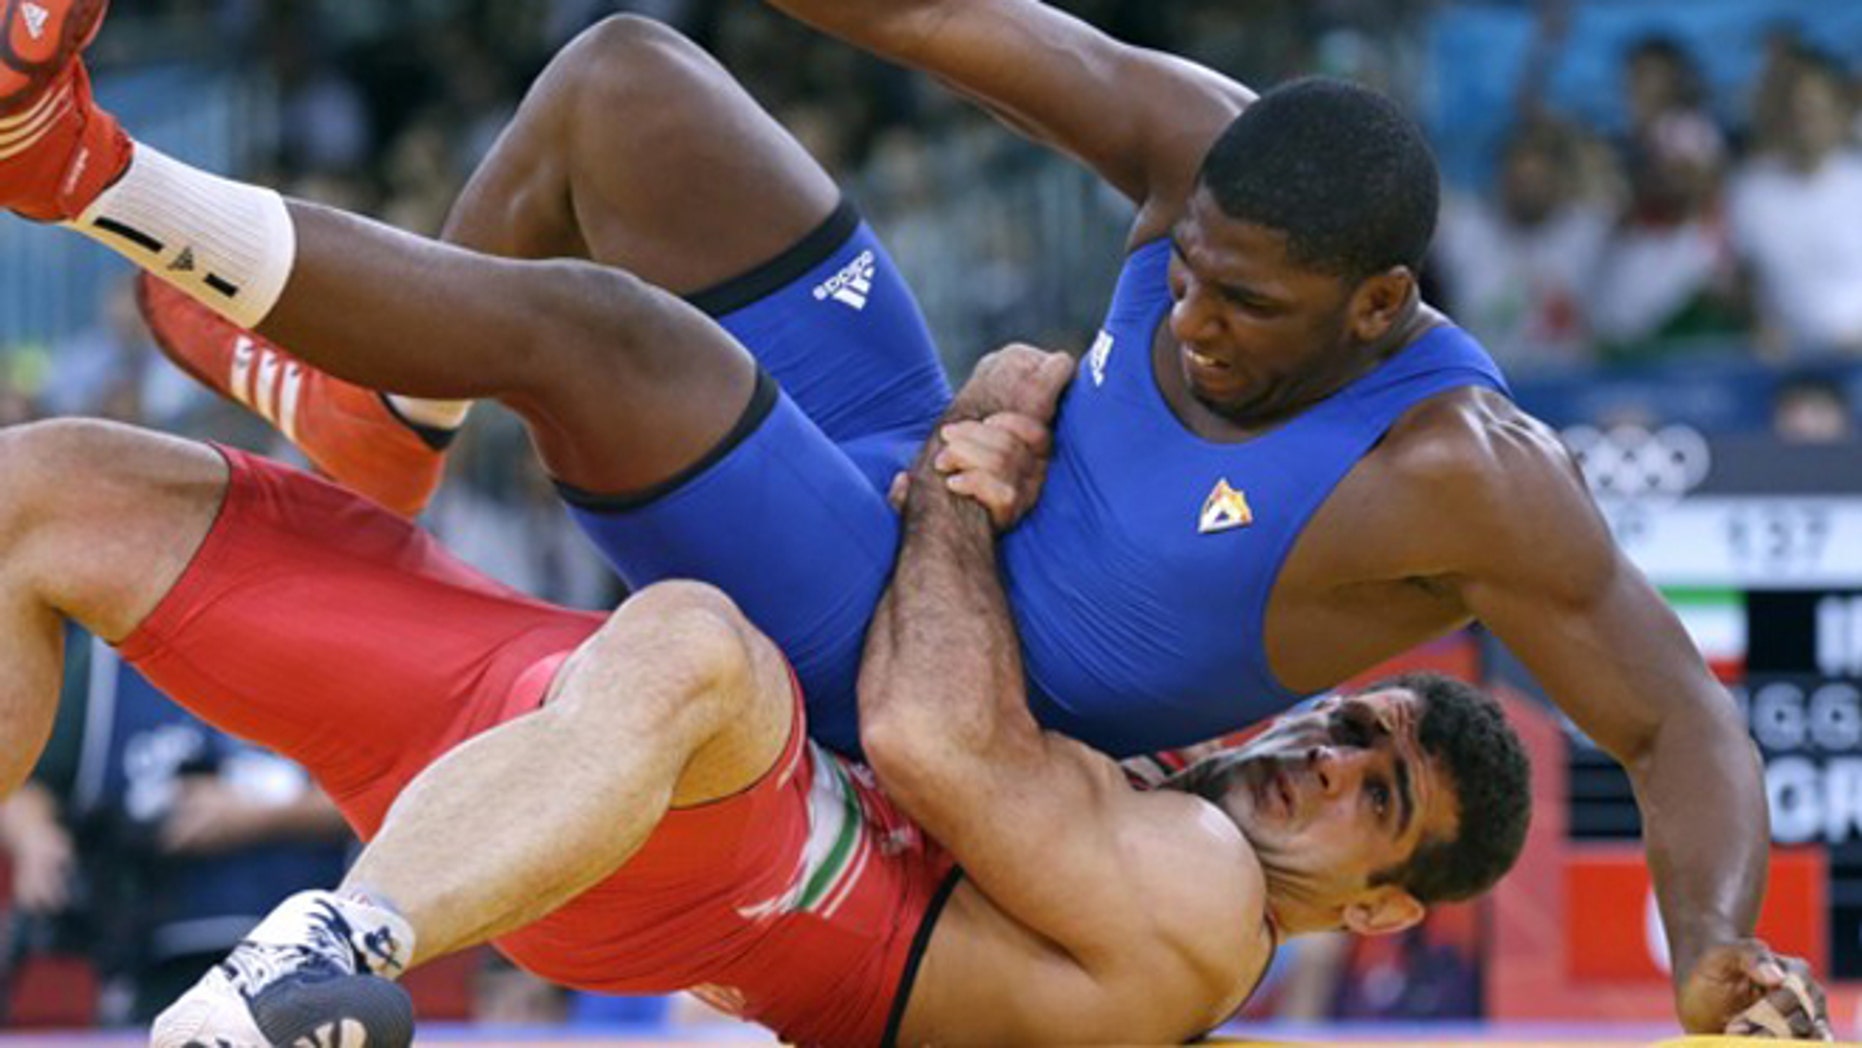 US pols launch campaign to save Olympic wrestling, call exclusion